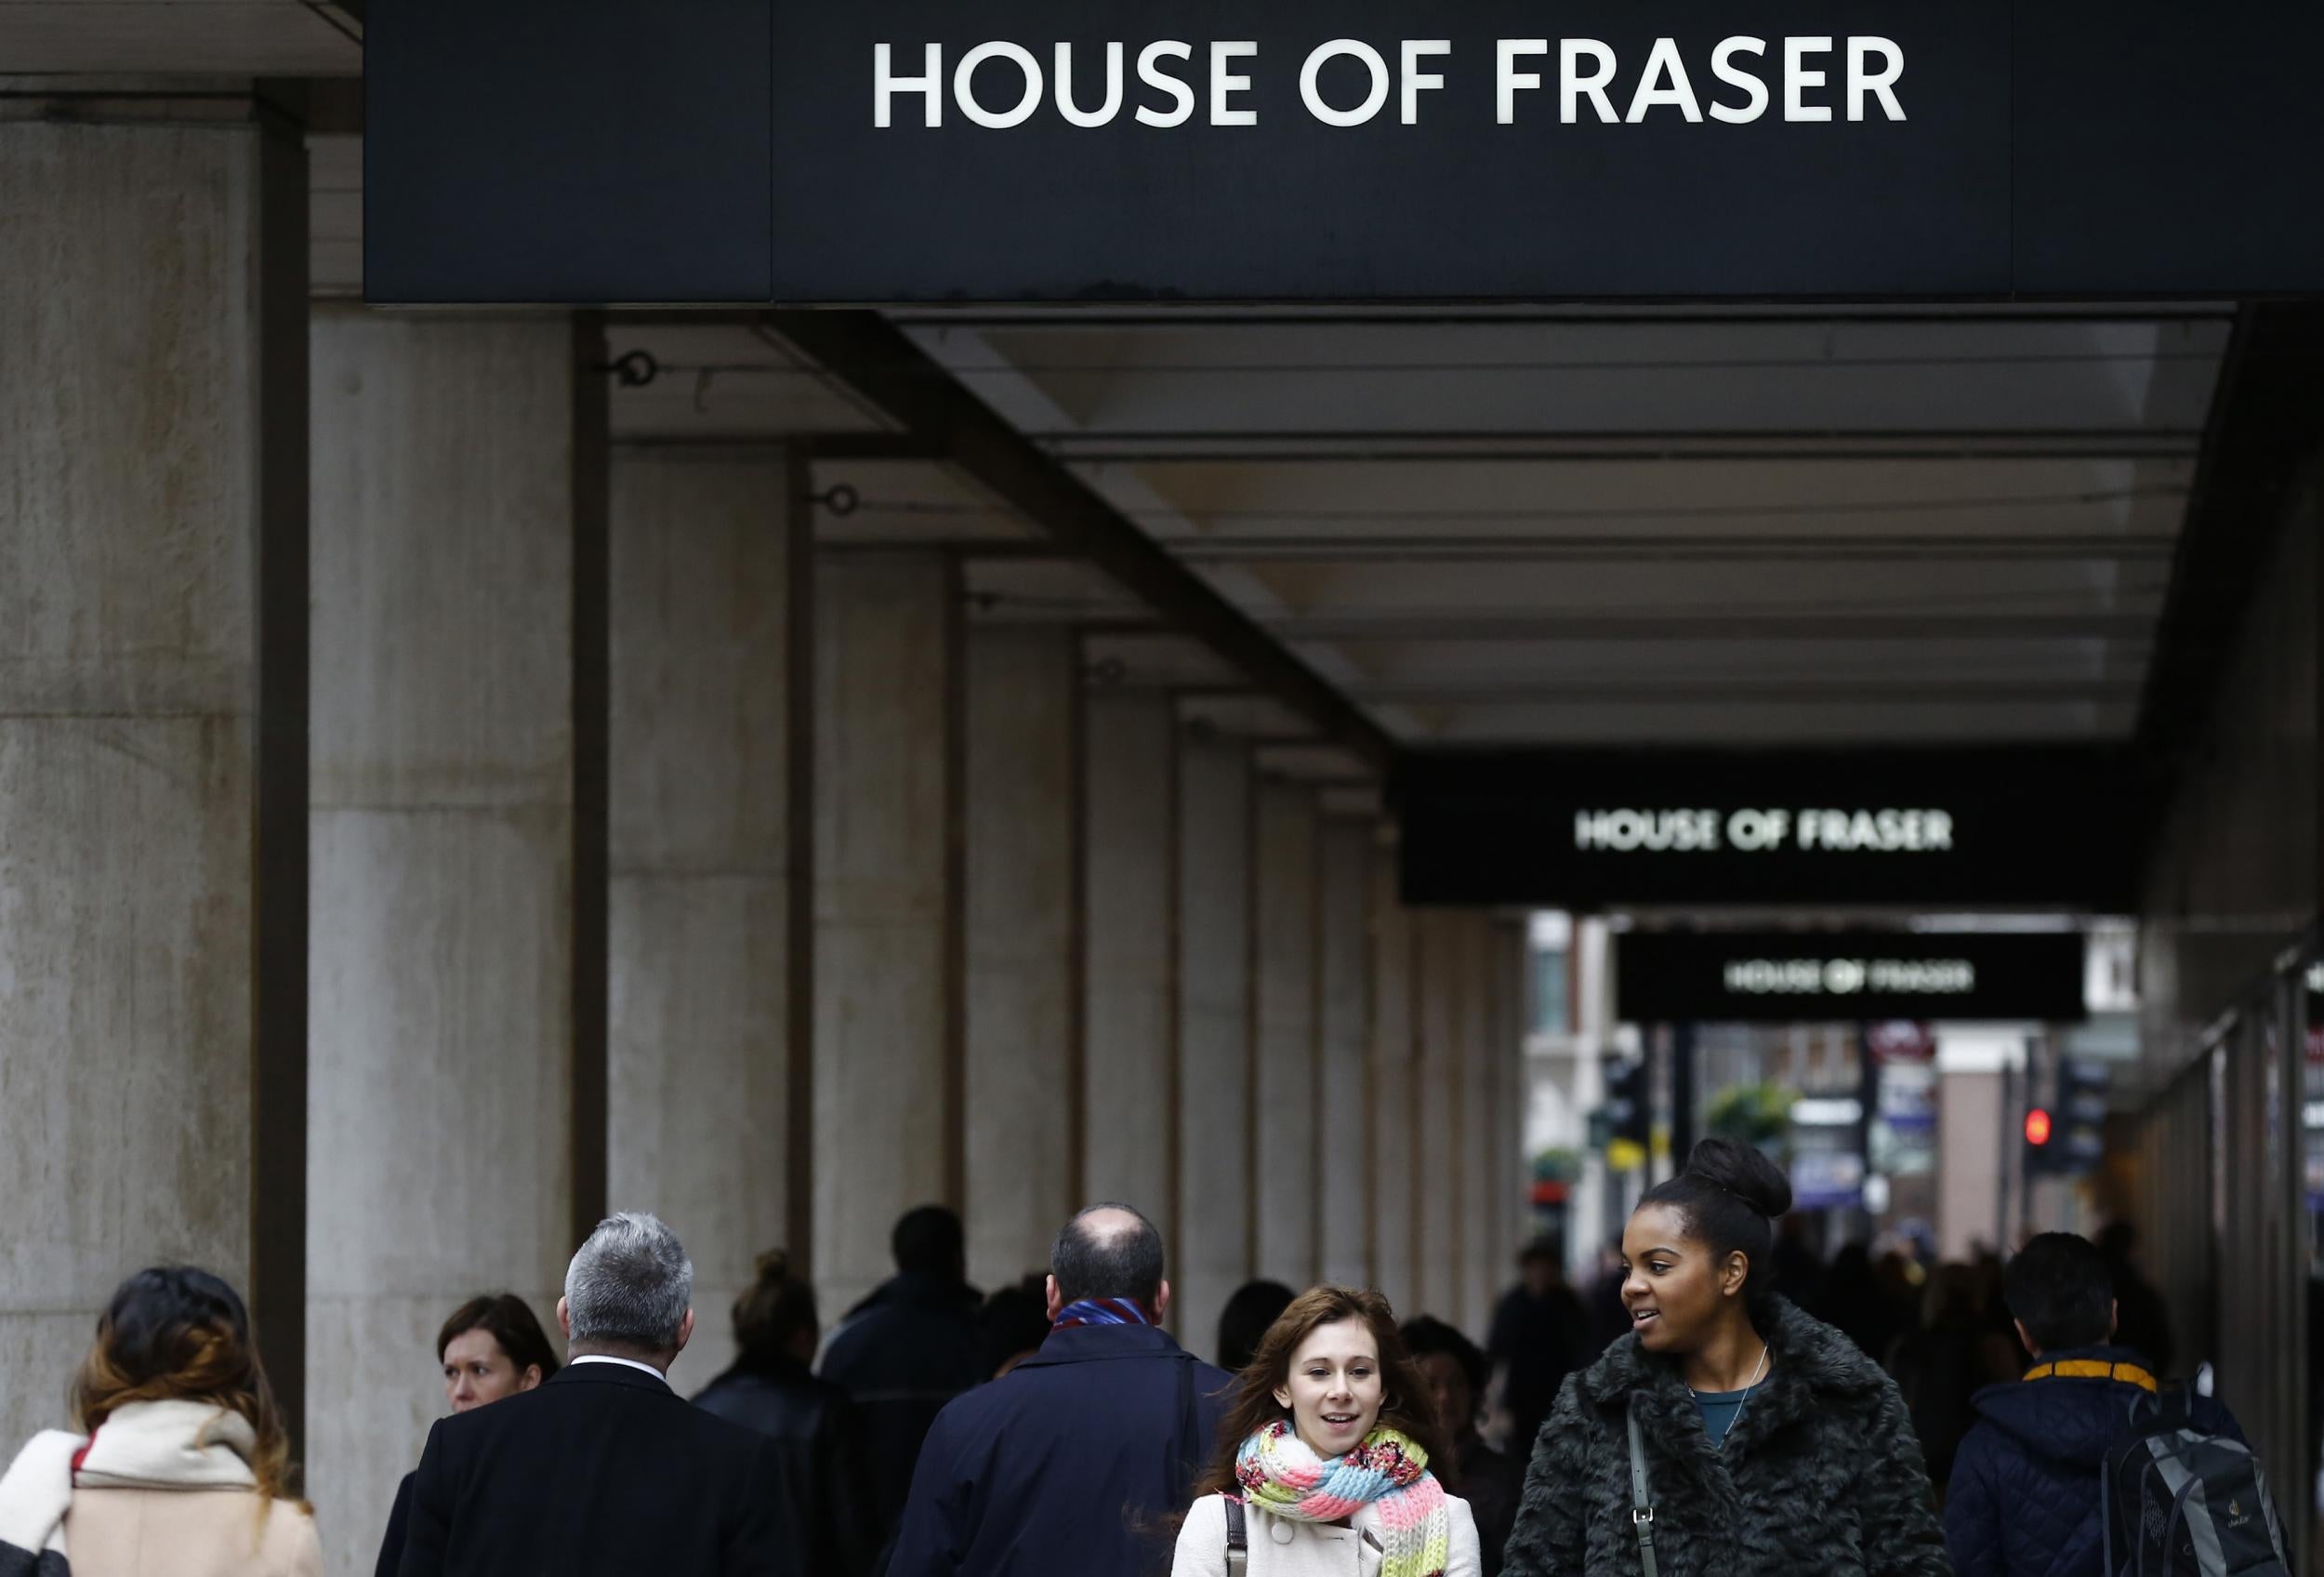 House of Fraser was bought out of administration by Sports Direct